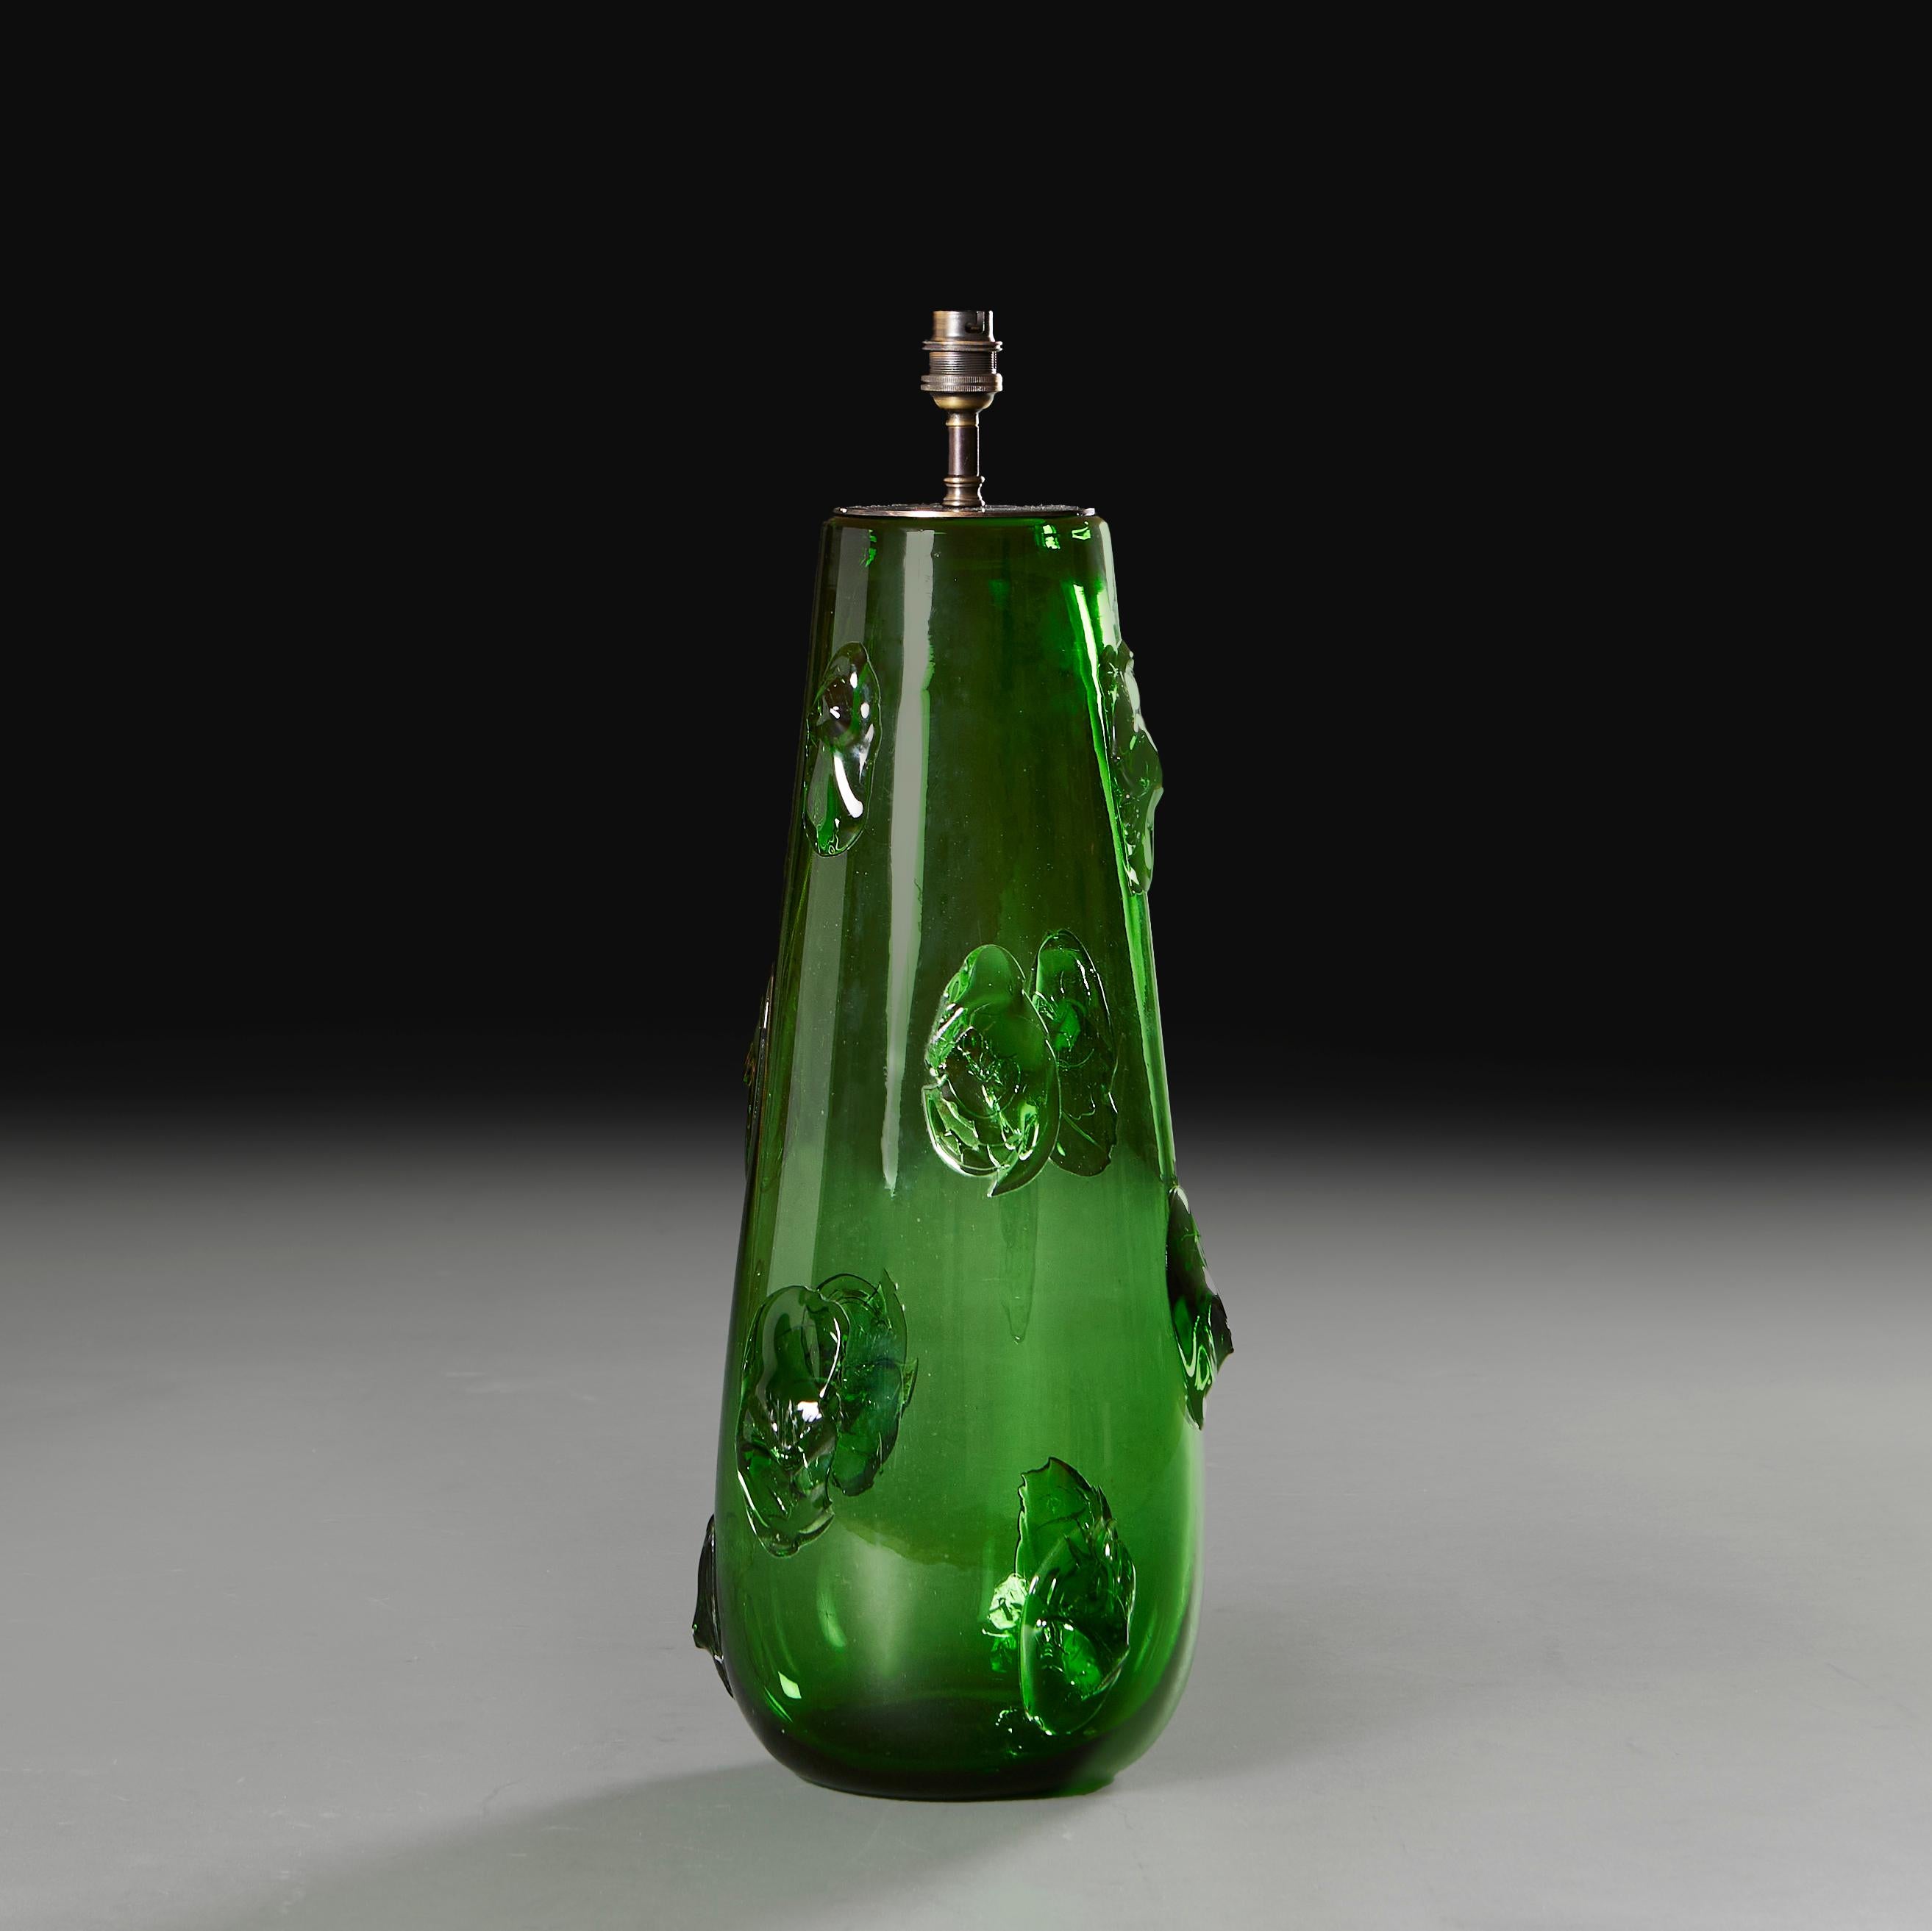  Italy, circa 1960

A green Empoli glass vase of large tapering form with hot applied prunt decoration to the surface, now converted as a lamp. 

Height 49.00cm
Diameter 19.00cm

Please note: This is currently wired for the UK with BC bulb fitting,